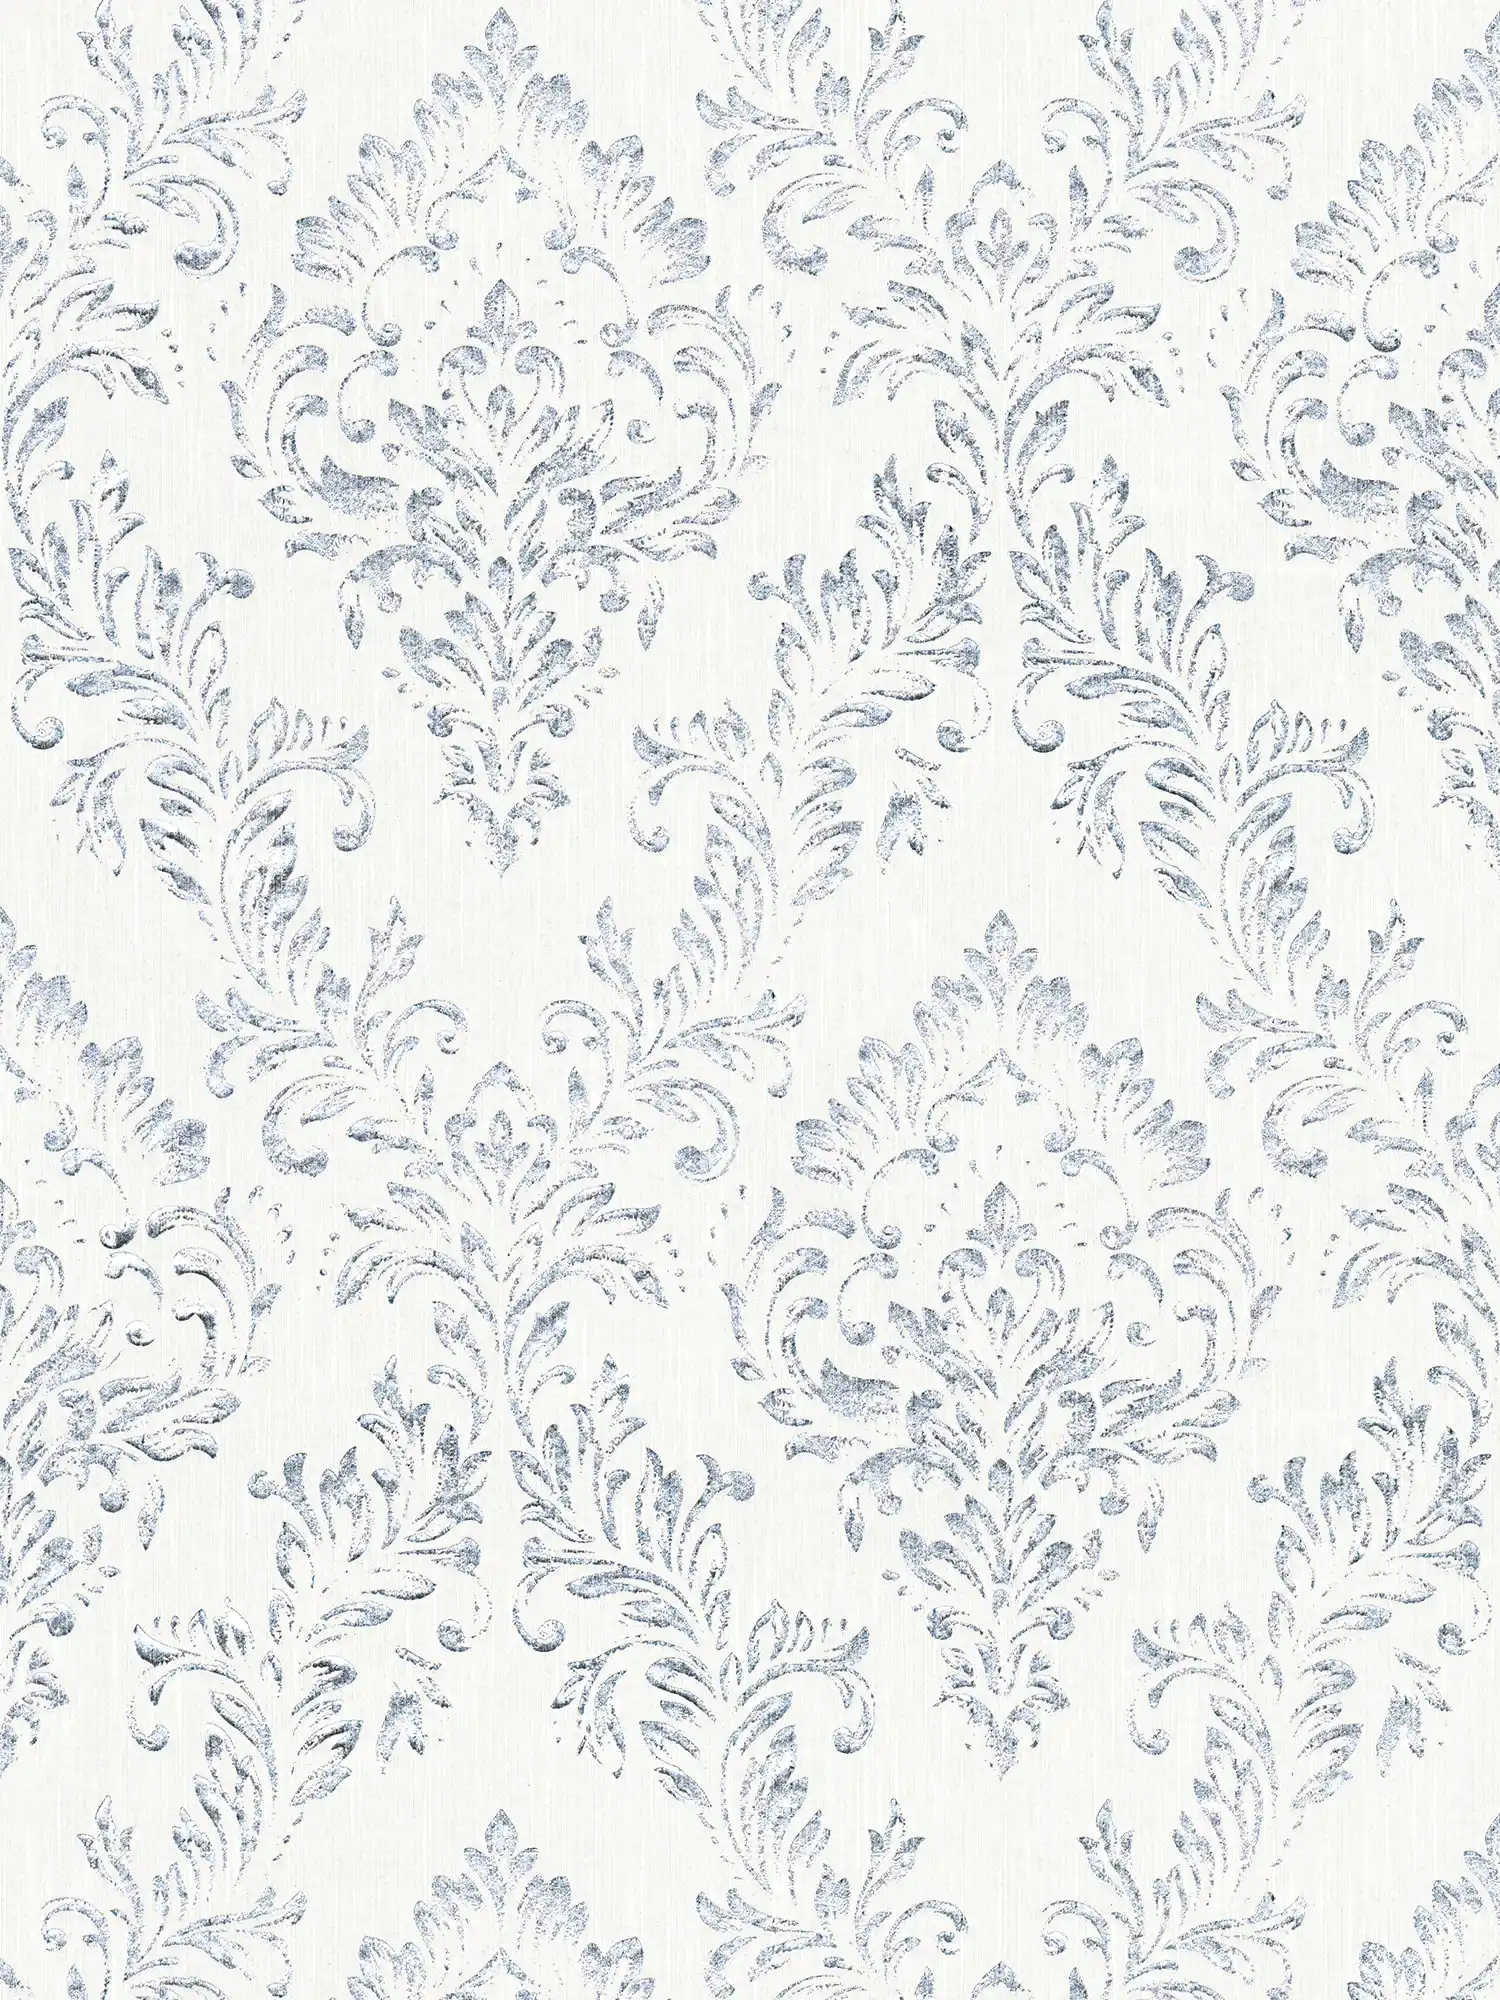 Ornament wallpaper in floral design with glitter effect - silver, white
